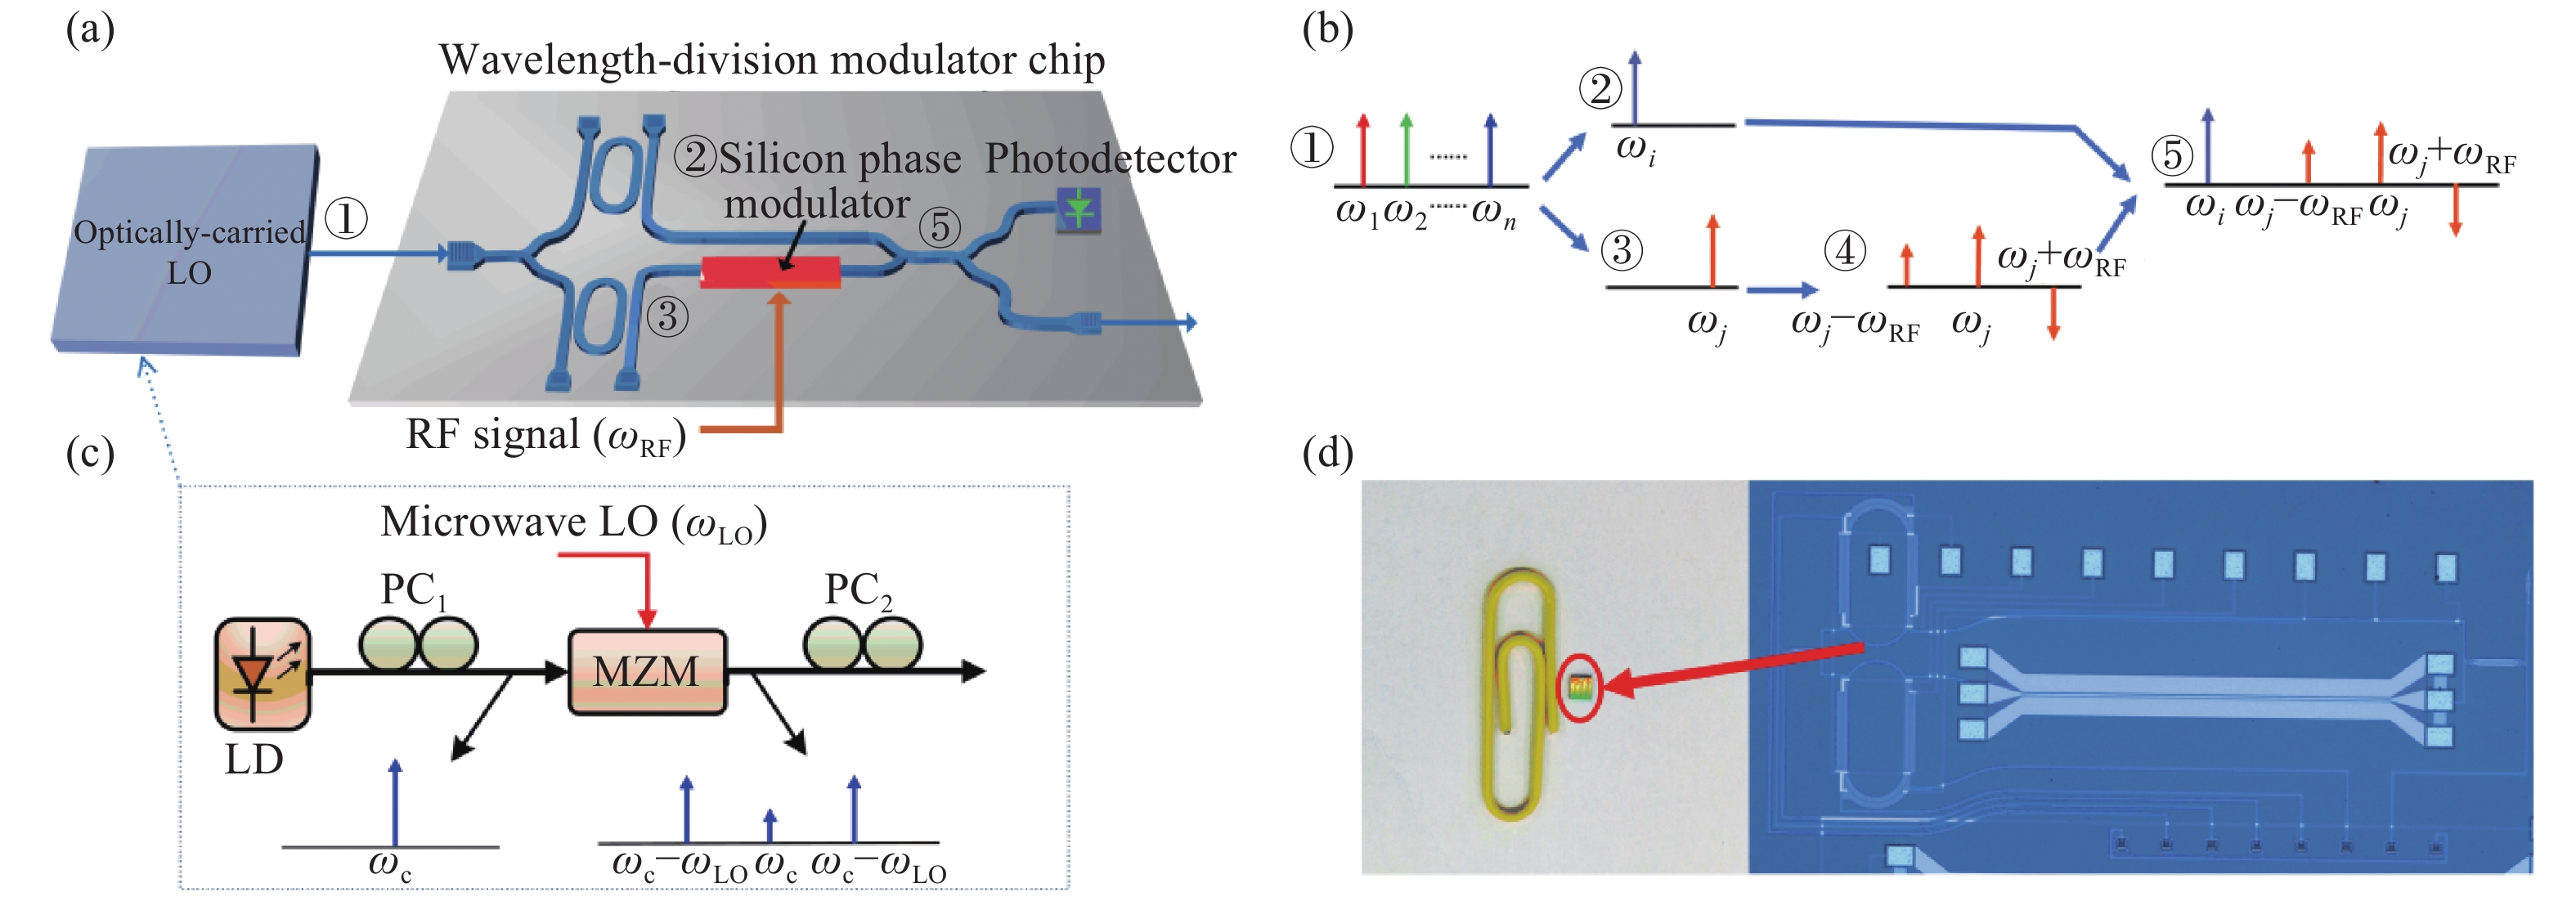 (a) Schematic diagram of the proposed microwave photonic frequency mixer; (b) Optical signal at the main point of the system; (c) Optically-carried local oscillator used in the experiment; (d) Photographs of the wavelength-division modulator chip